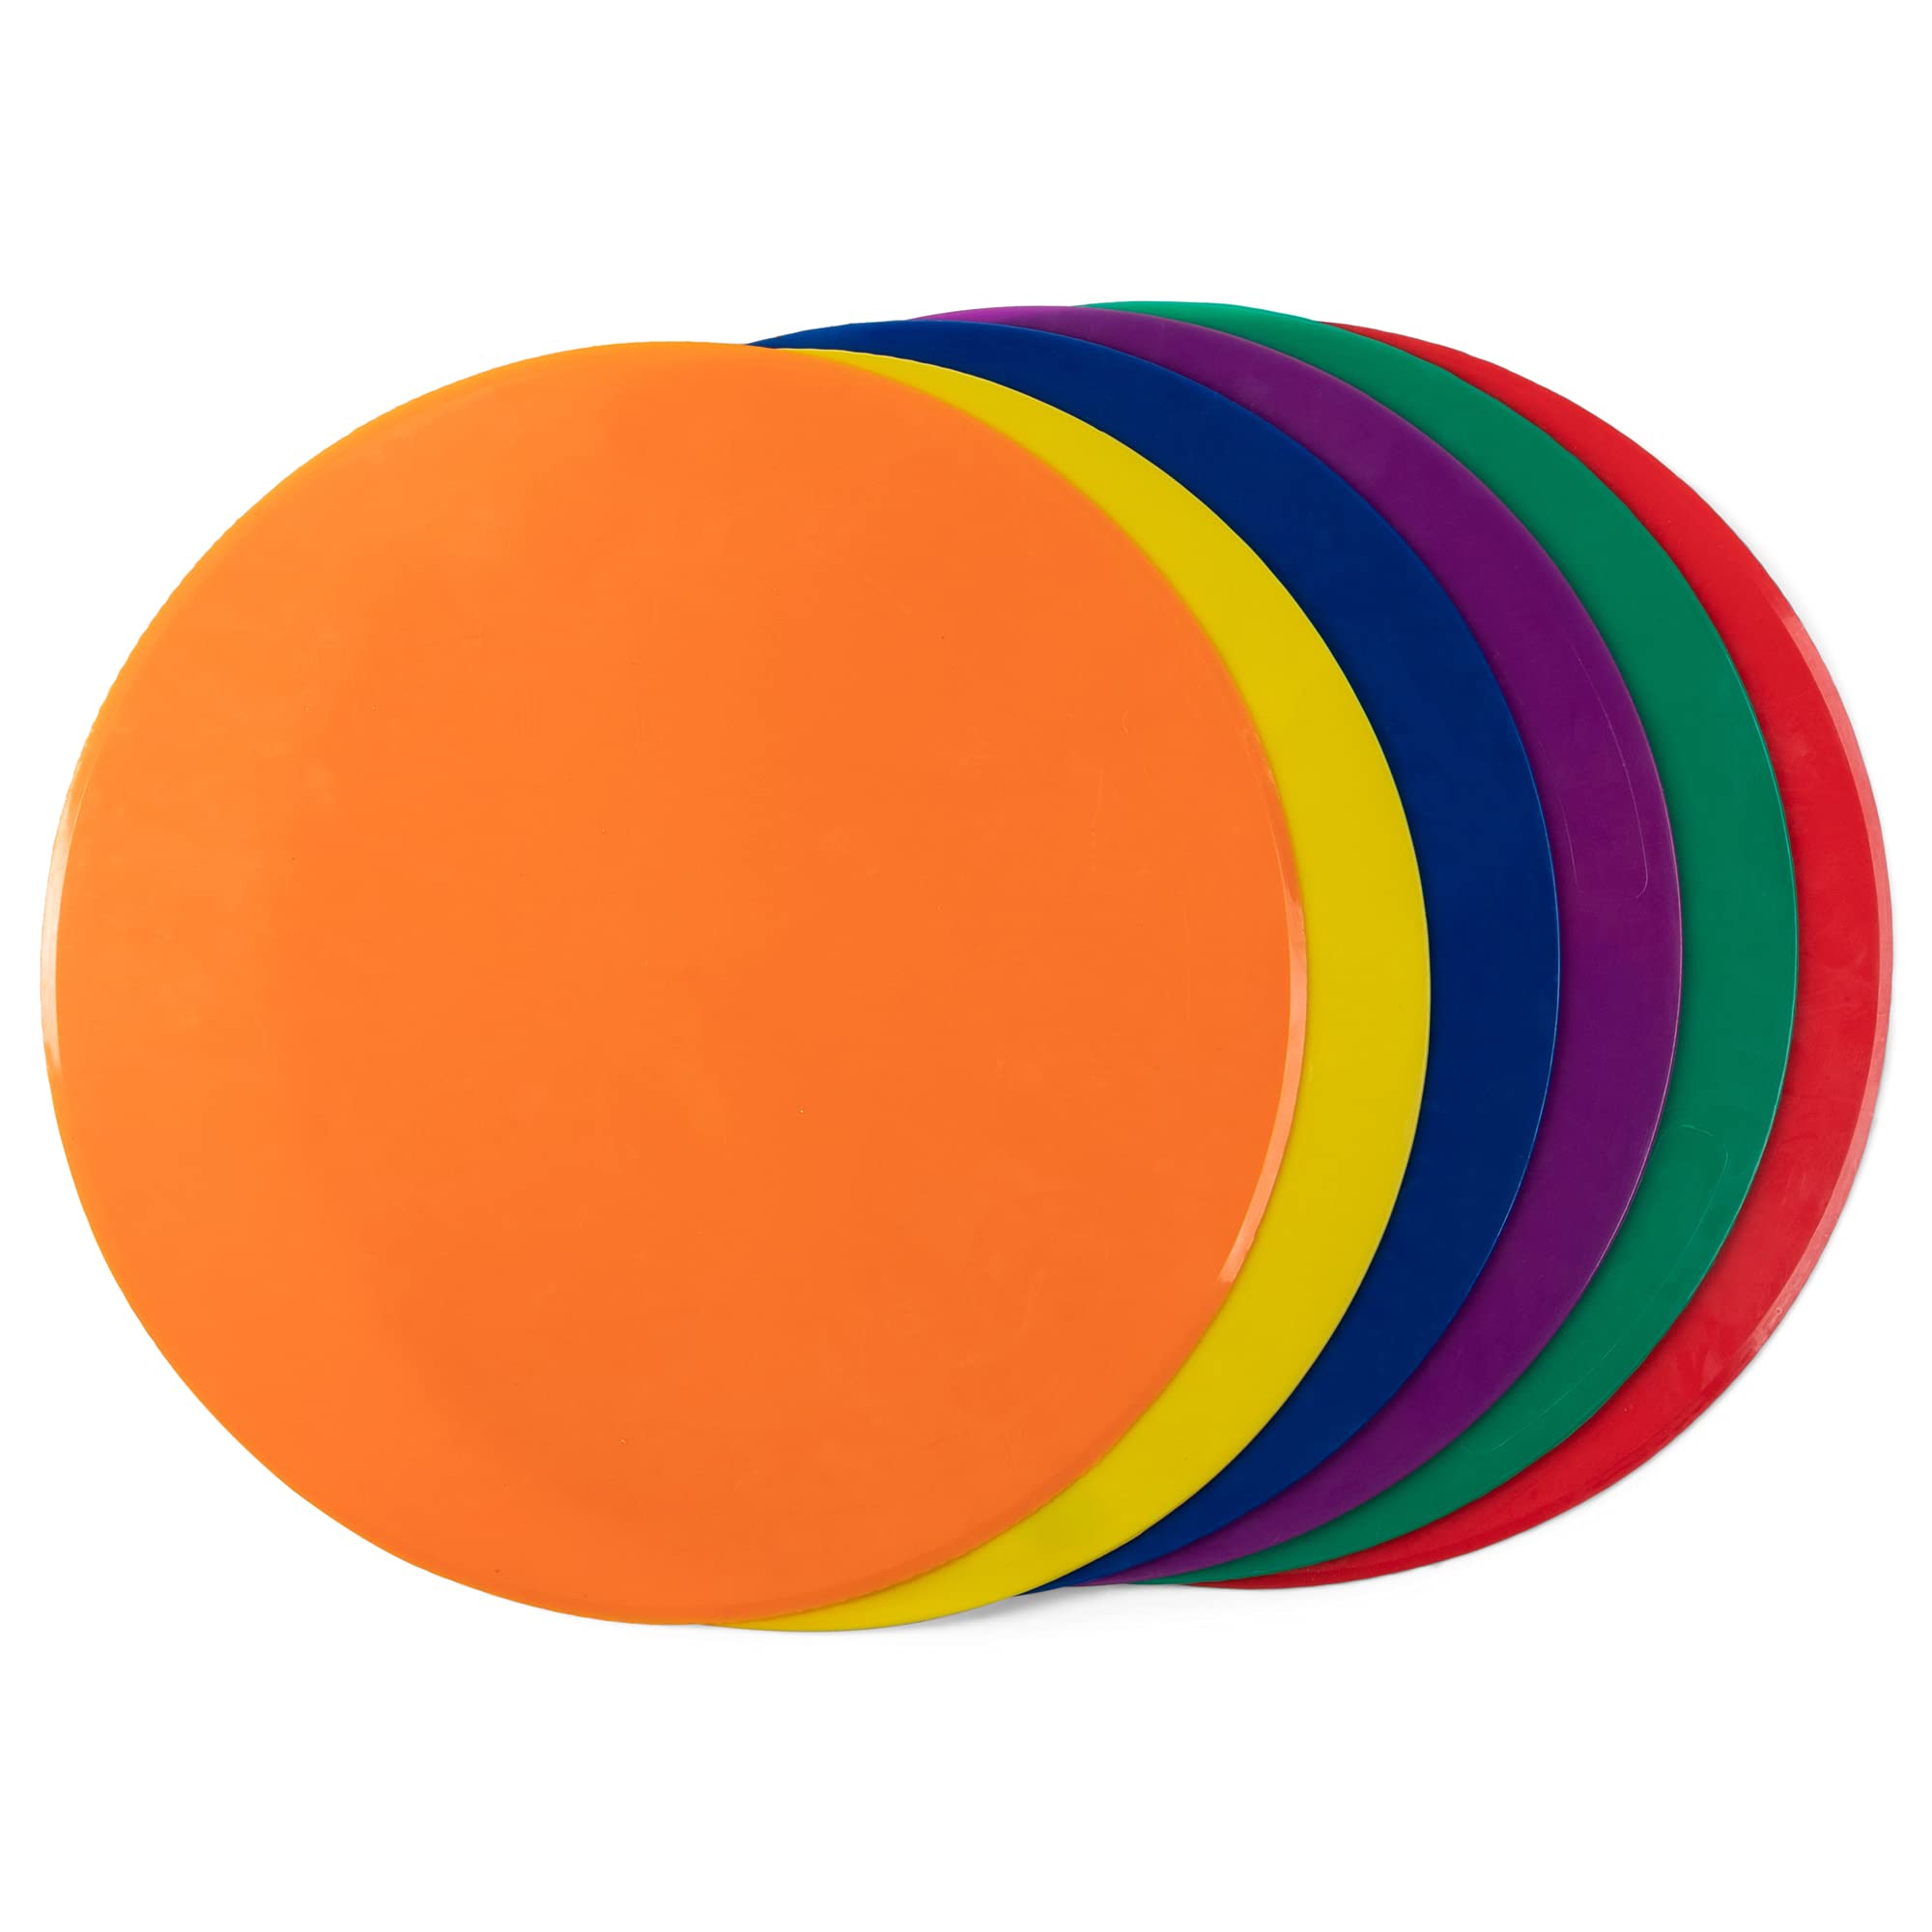 Champion Sports MSPSET Poly Spot Markers for Sports, Activities, and Social Distancing - 10-inch, Set of 6 - Multicolor